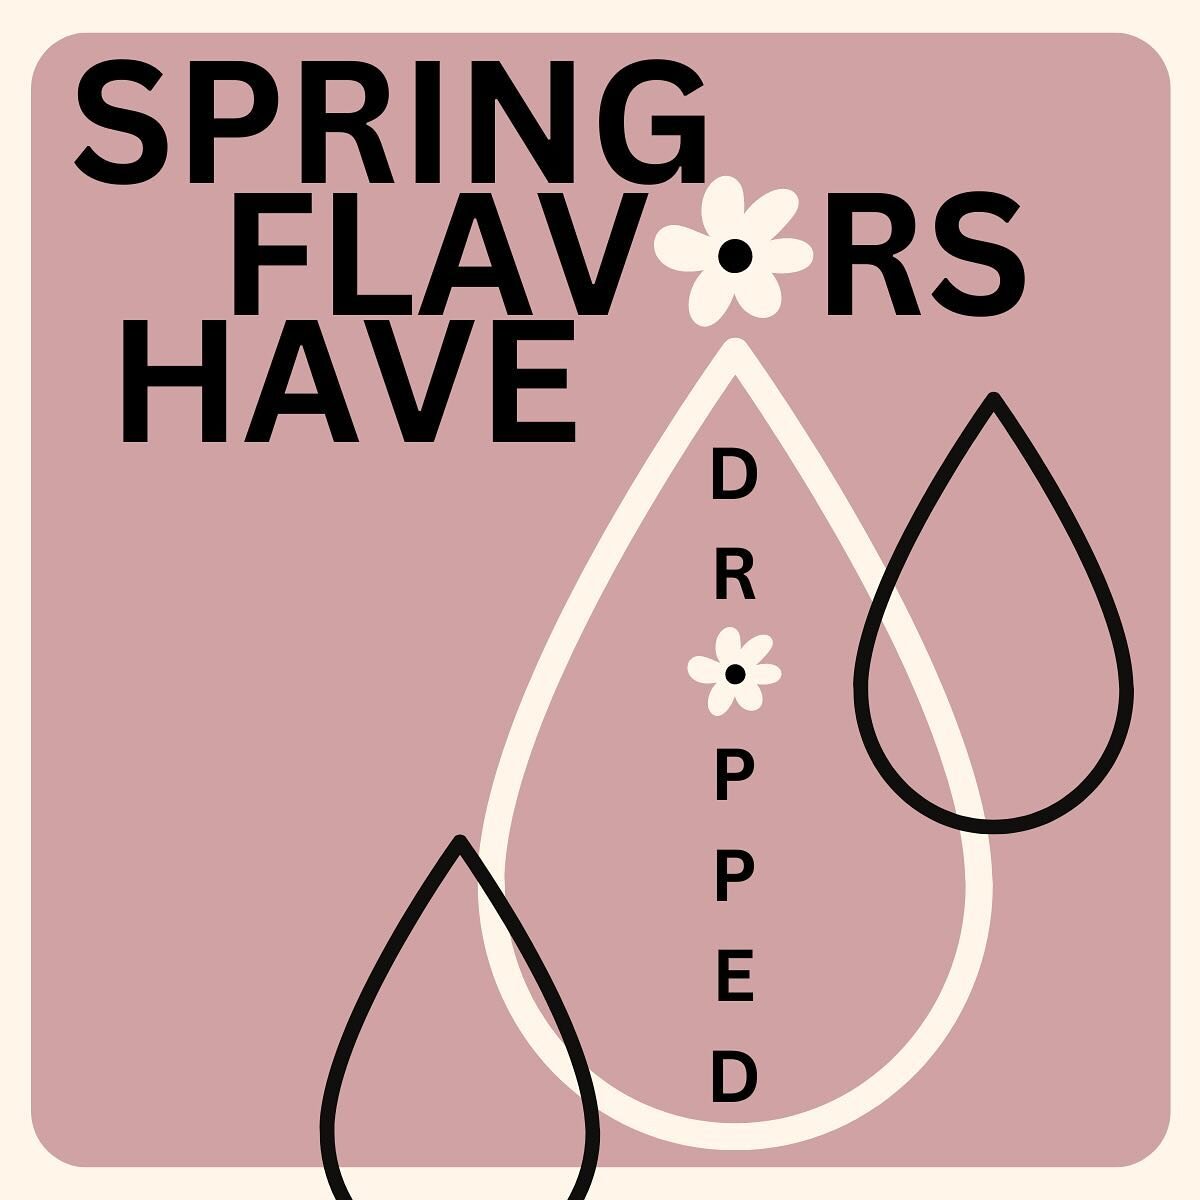 S P R I N G

Ignore the weather &mdash; spring flavors are here!! 
Stop in and try a new item today - we&rsquo;ve got lots of fruity flowery flavors that will trick your brain into thinking it&rsquo;s spring outside, too. 

See you soon!